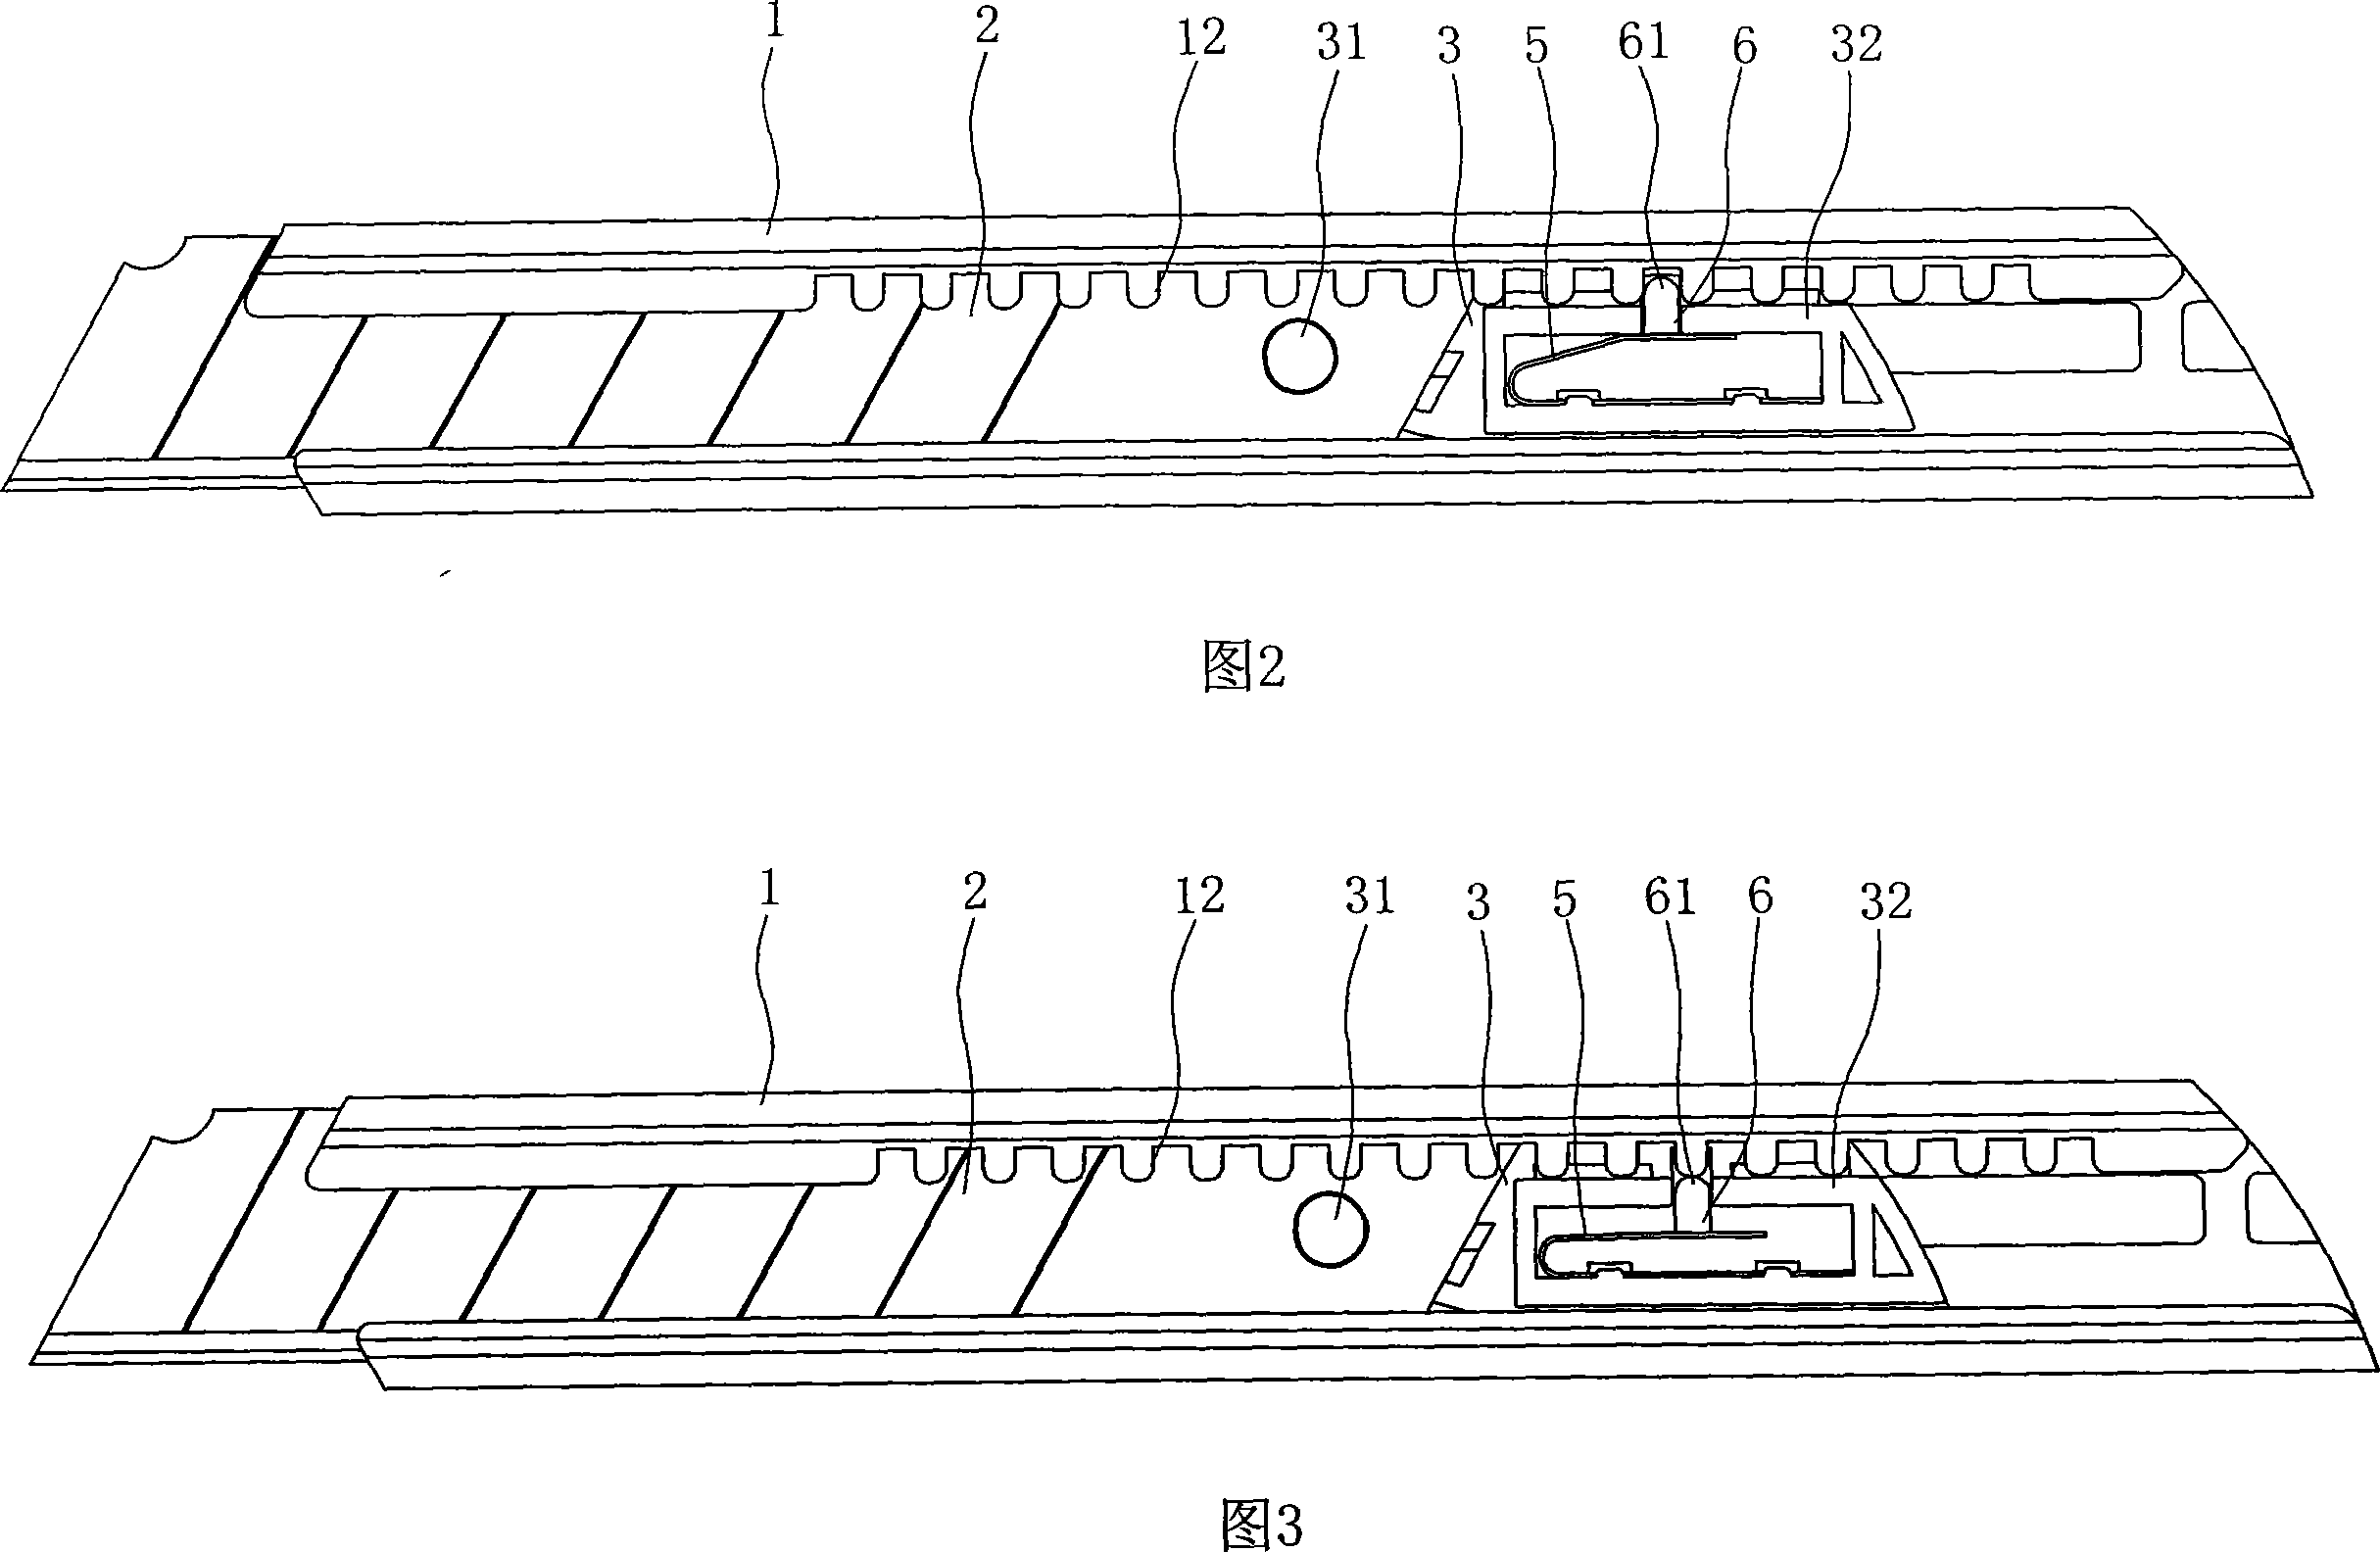 Craft knife capable of automatically locking blade position